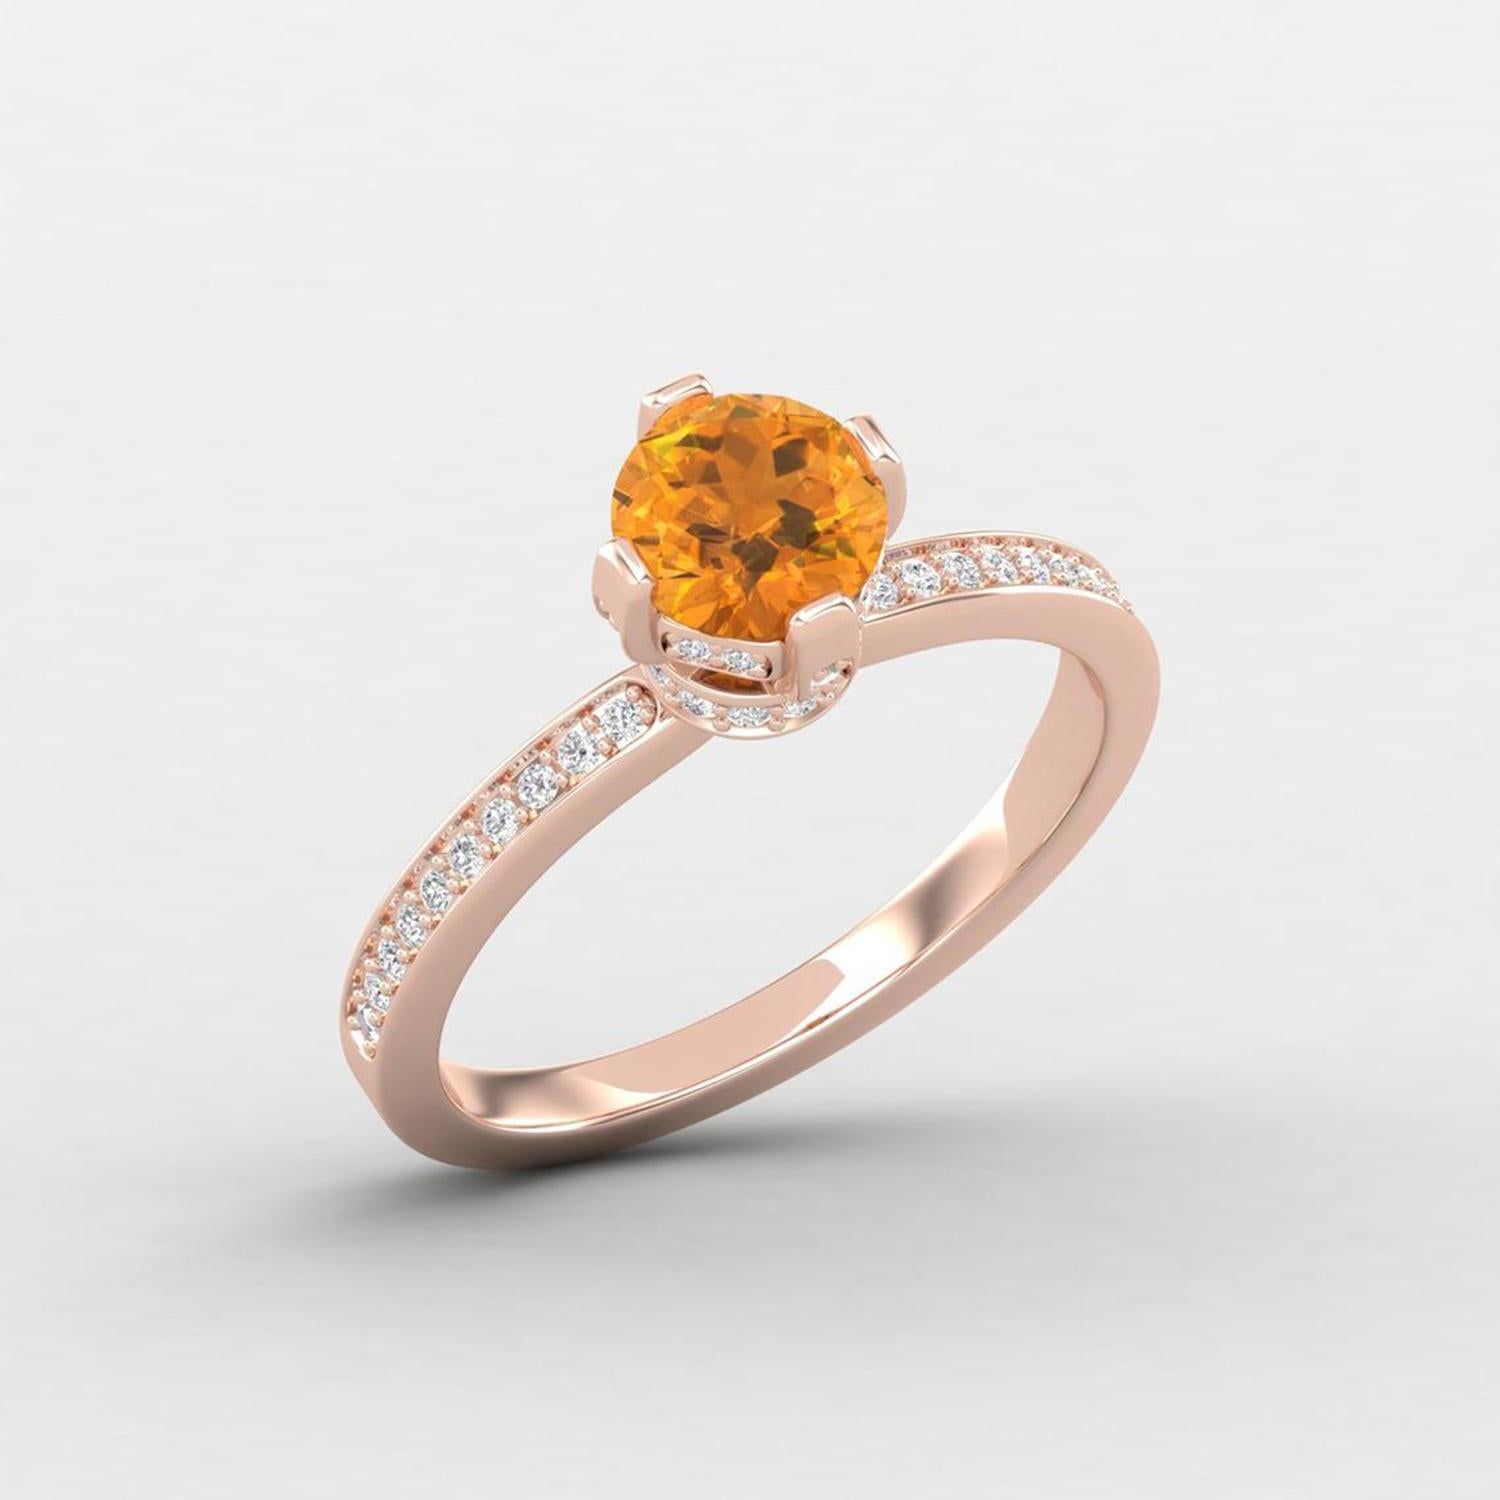 Round Cut 14 K Gold Citrine Ring / Diamond Solitaire Ring / Engagement Ring for Her For Sale